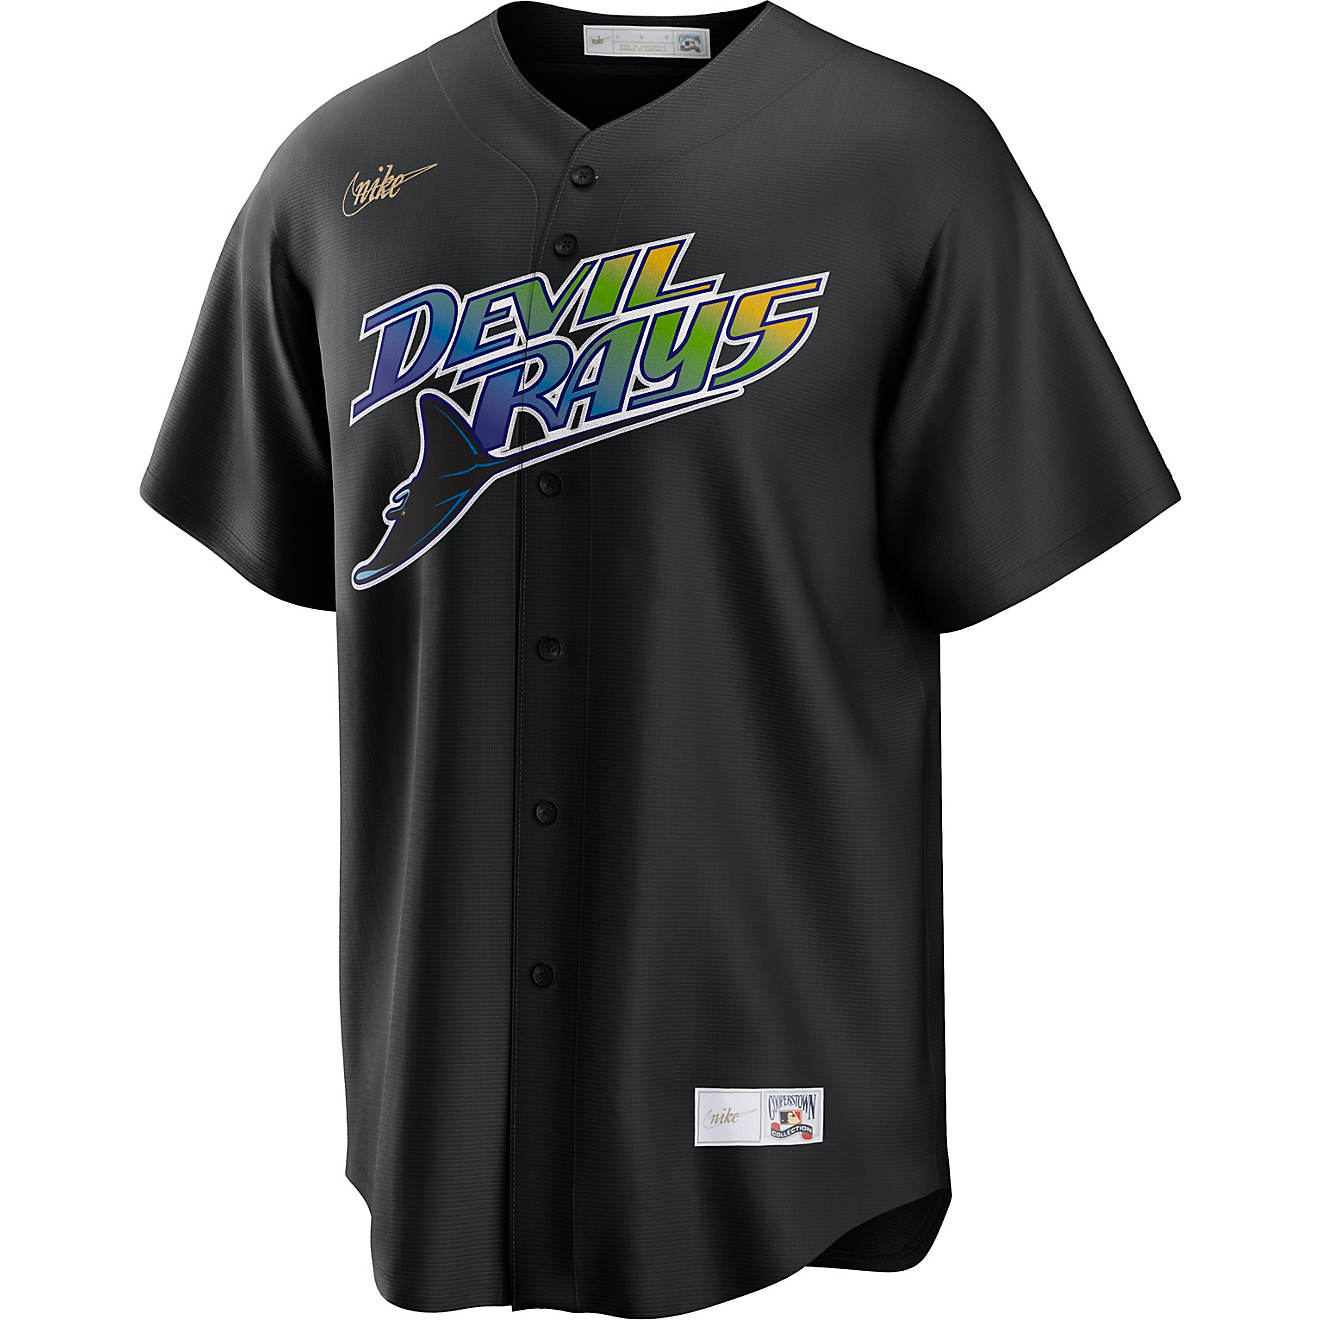 tampa bay rays mens jersey